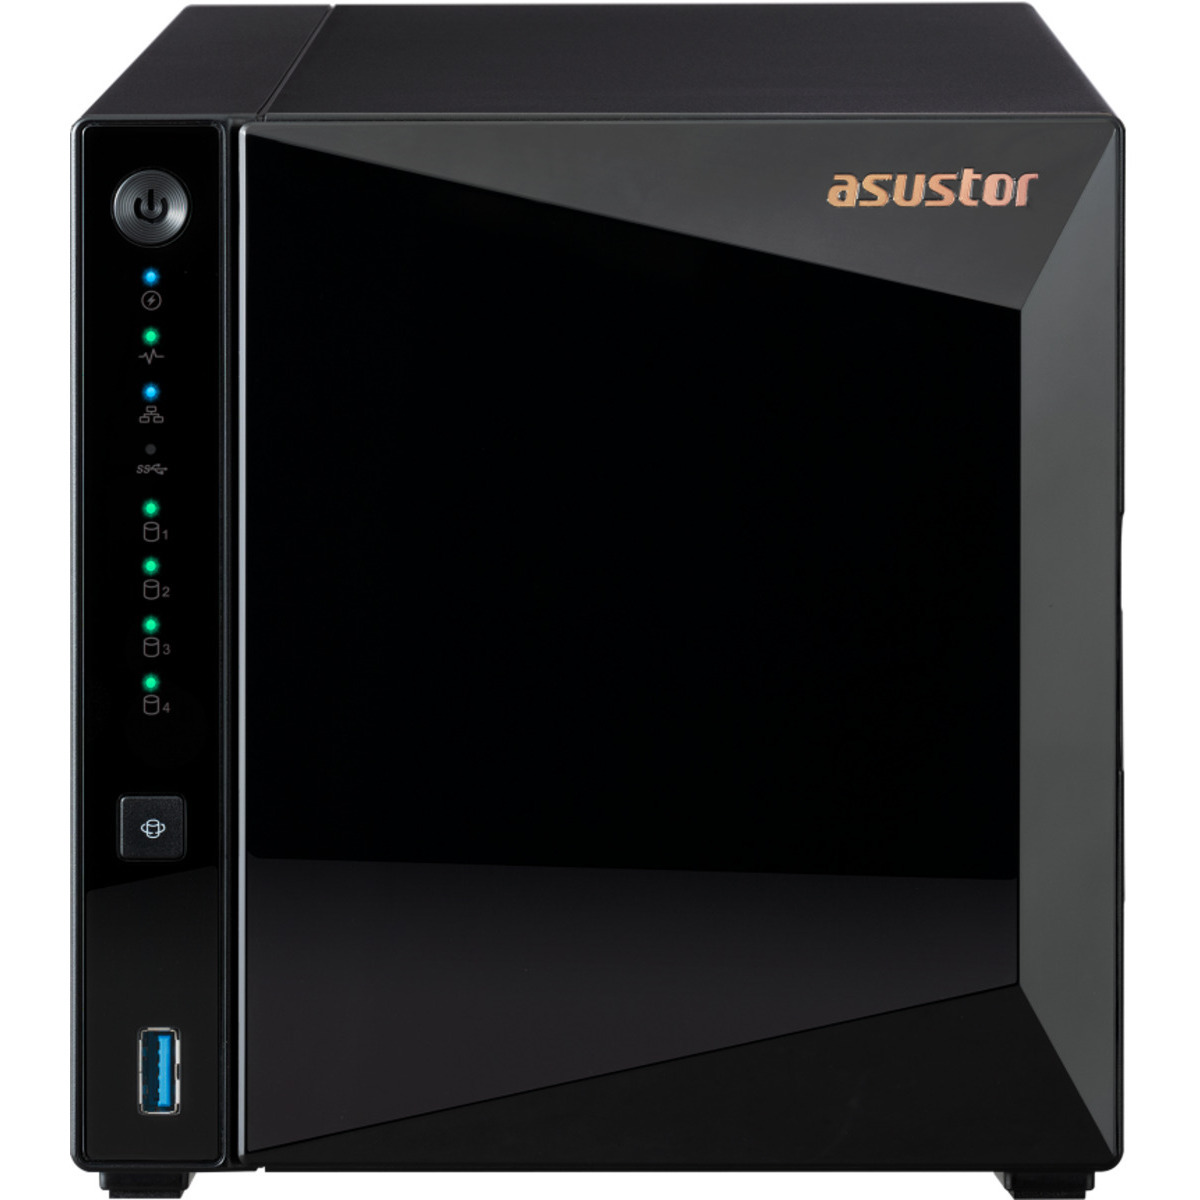 buy $1484 ASUSTOR DRIVESTOR 4 Pro AS3304T 64tb Desktop NAS - Network Attached Storage Device 4x16000gb Toshiba Enterprise Capacity MG08ACA16TE 3.5 7200rpm SATA 6Gb/s HDD ENTERPRISE Class Drives Installed - Burn-In Tested - nas headquarters buy network attached storage server device das new raid-5 free shipping usa DRIVESTOR 4 Pro AS3304T